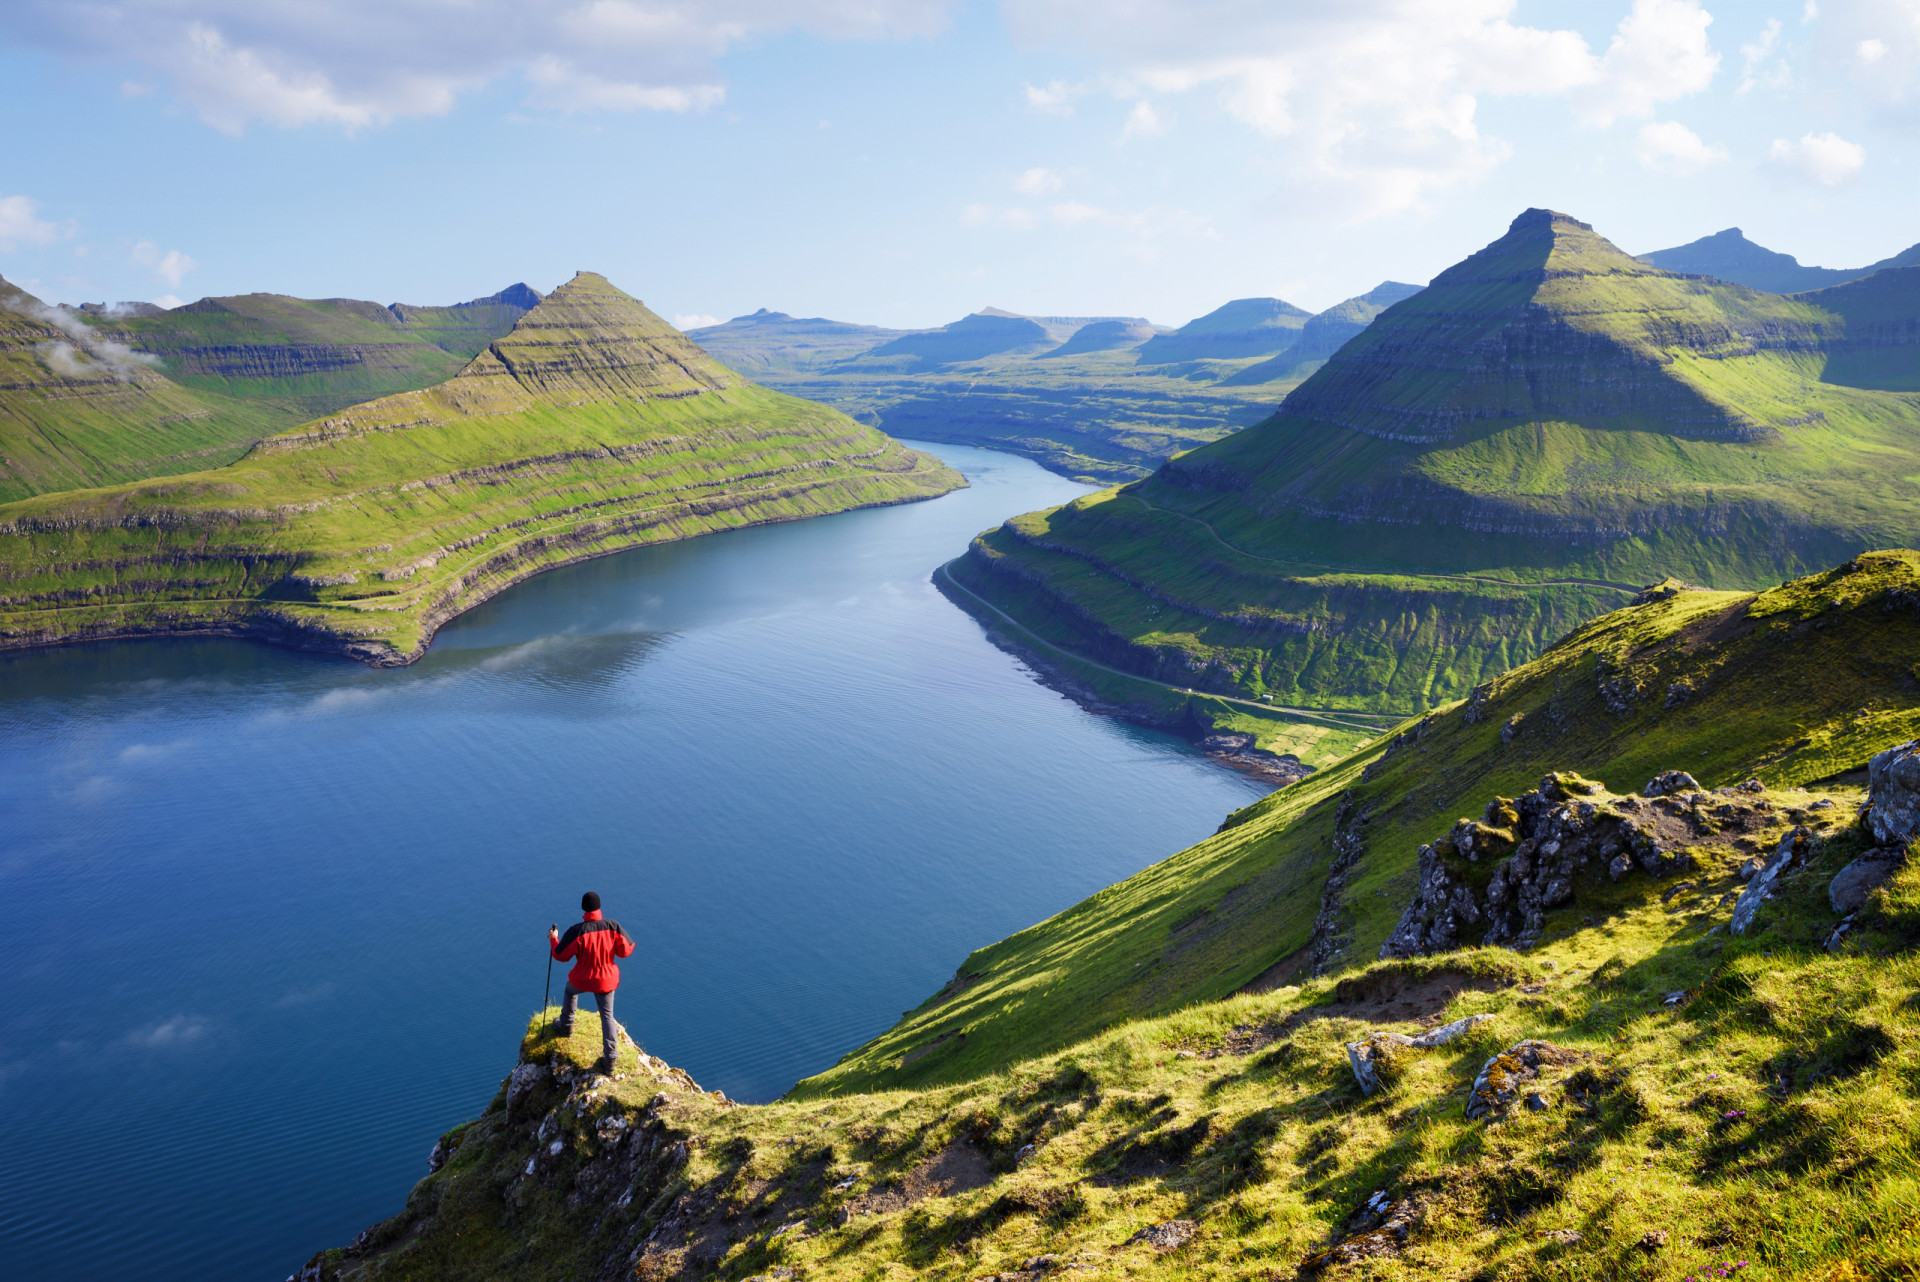 <p>Not a vacation destination that immediately springs to mind, the Faroe Islands are nonetheless a world-class adventure tourism hotspot. This remote North Atlantic <a href="https://www.starsinsider.com/travel/242638/the-worlds-most-stunning-archipelagos" rel="noopener">archipelago</a> affords some of the most rewarding hiking found in northern Europe. And get this: foodies can enjoy top-tier dining at restaurants such as Roks in Tórshavn, the Faroe Islands' snug capital.</p><p>You may also like:<a href="https://www.starsinsider.com/n/494354?utm_source=msn.com&utm_medium=display&utm_campaign=referral_description&utm_content=636762en-en"> Movies where the protagonist dies</a></p>